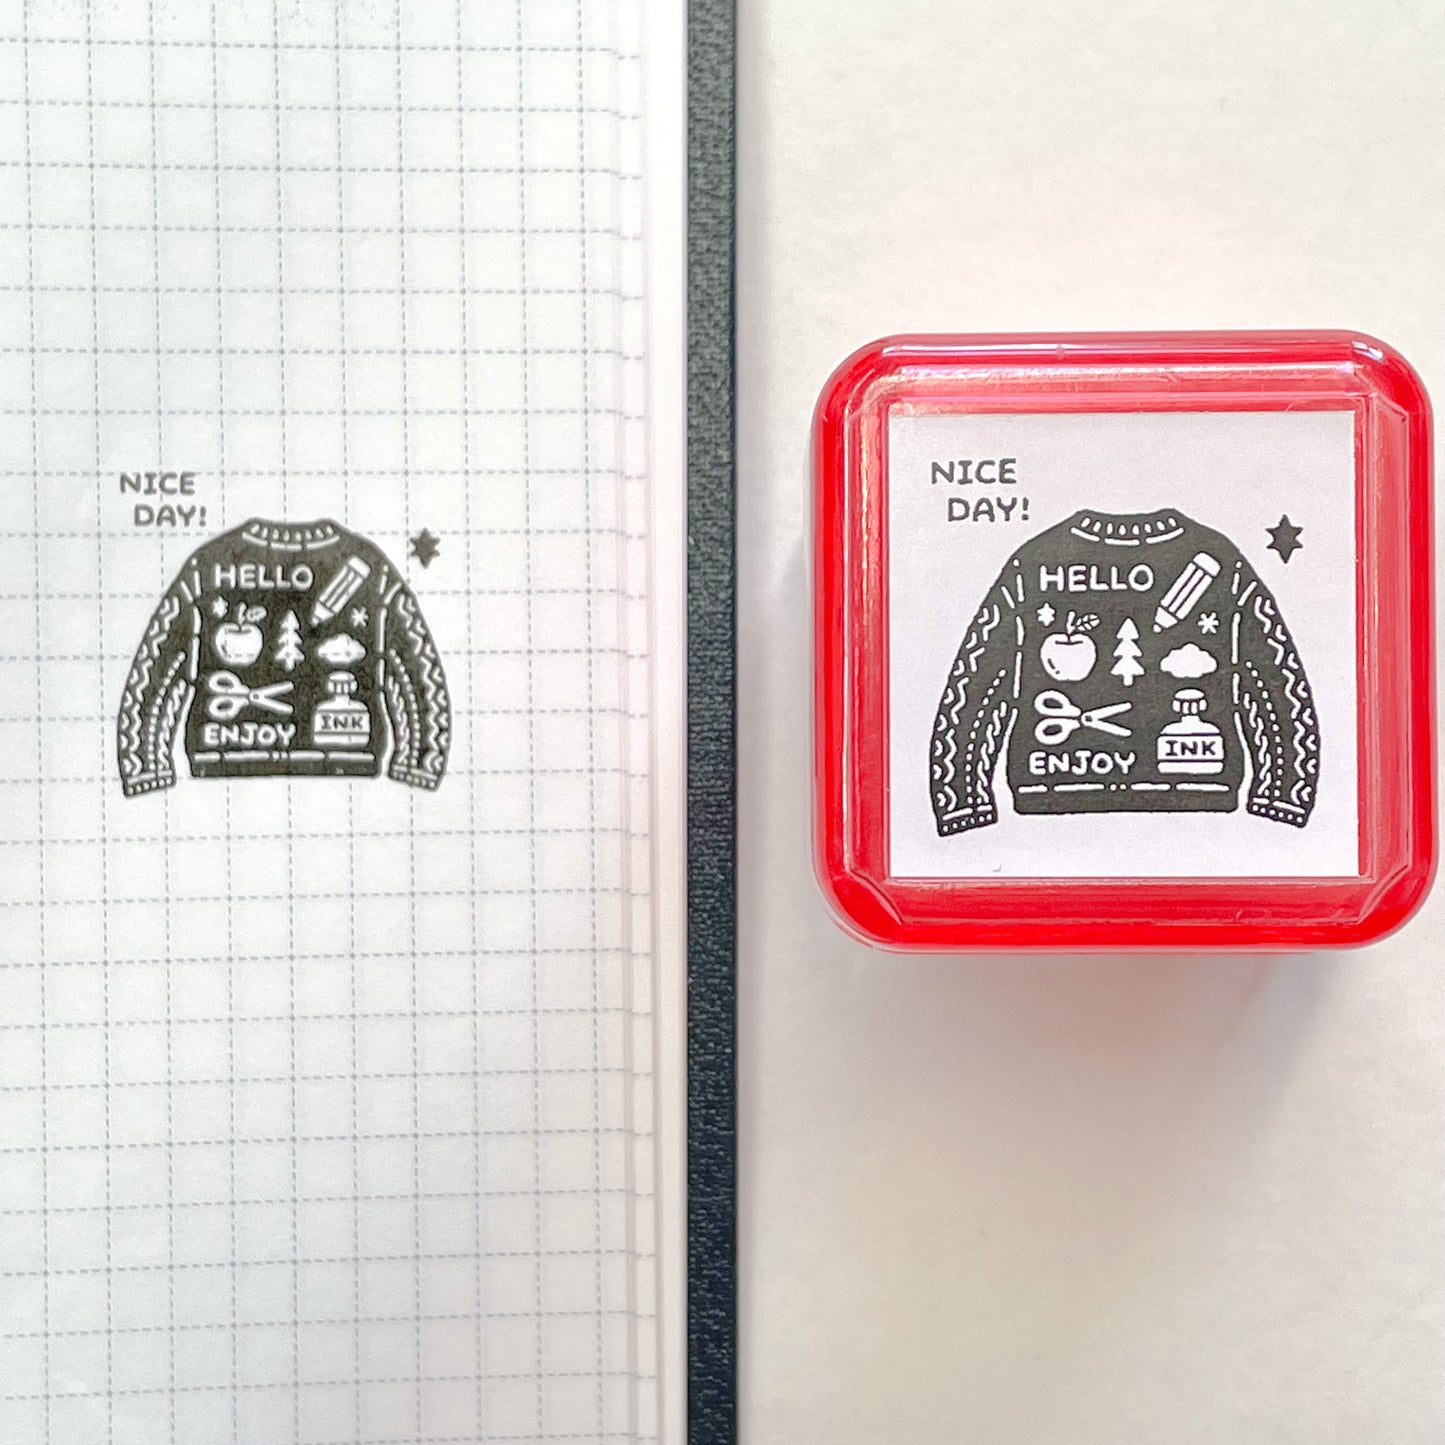 eric small things x SANBY Self-Inking Stamps